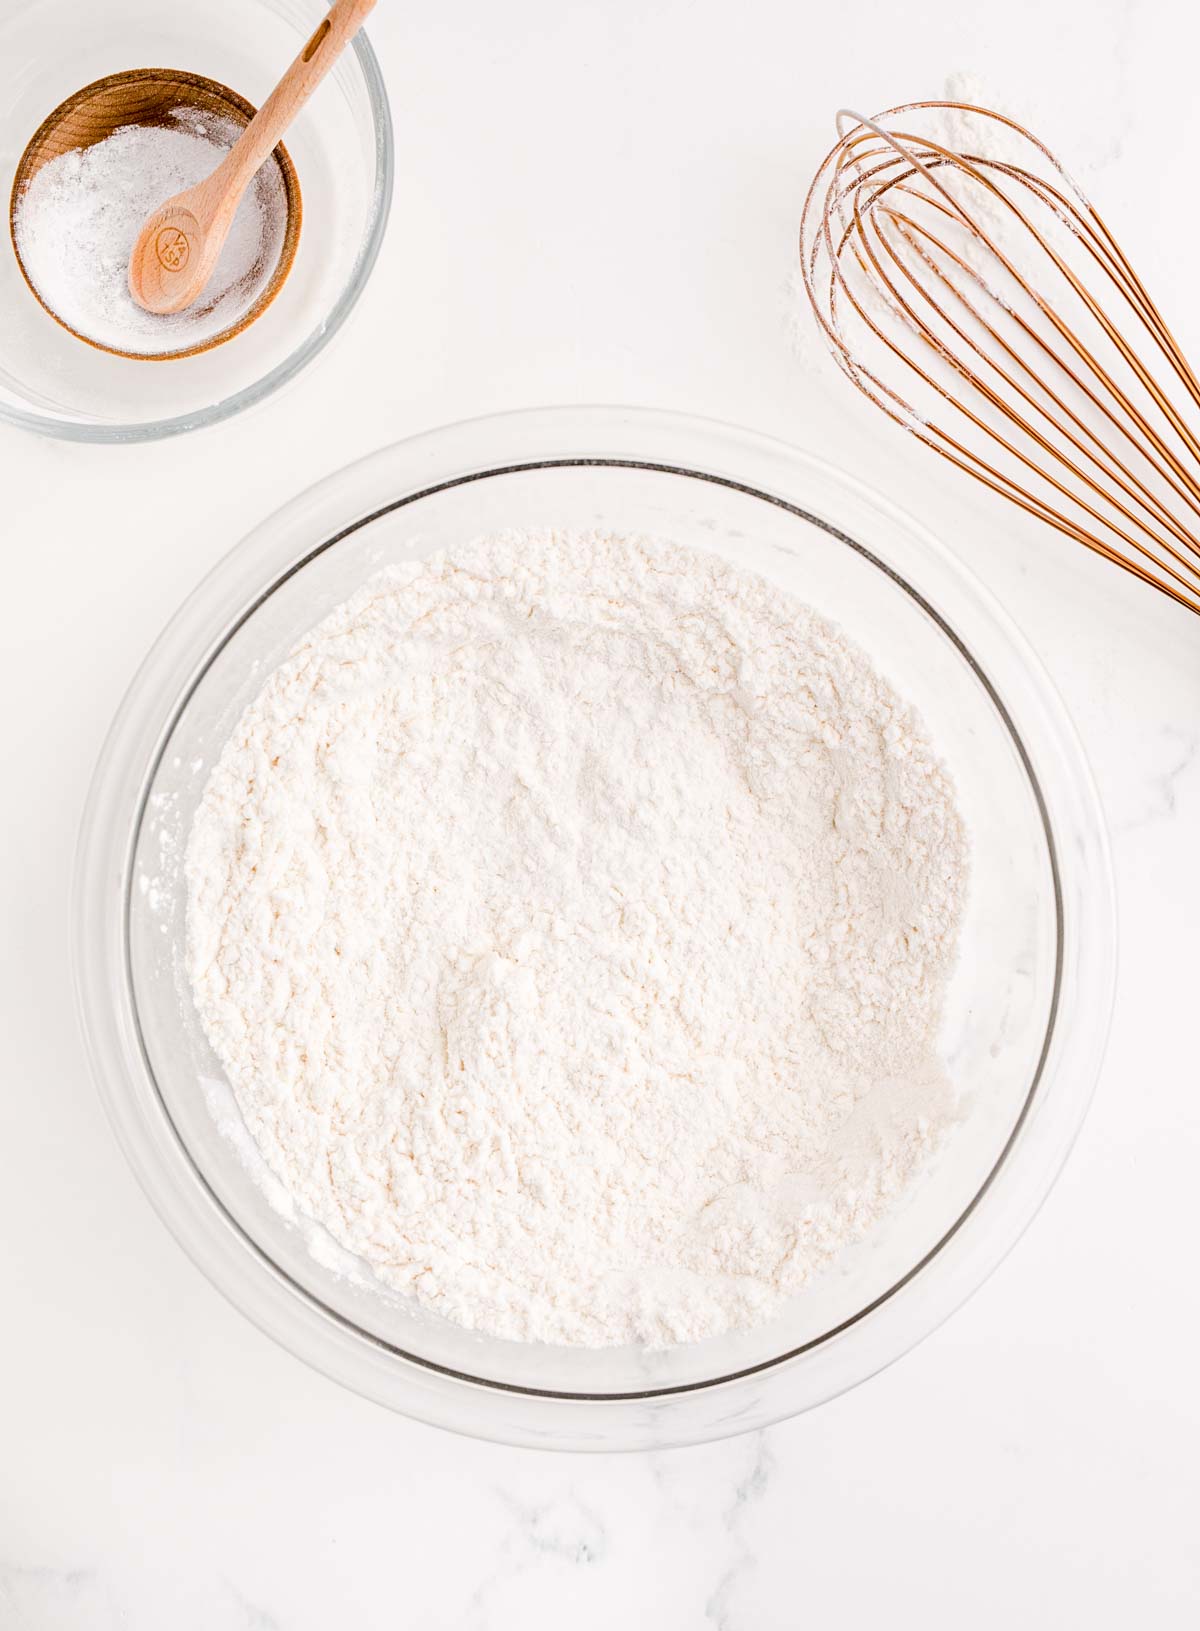 flour and salt in a glass bowl